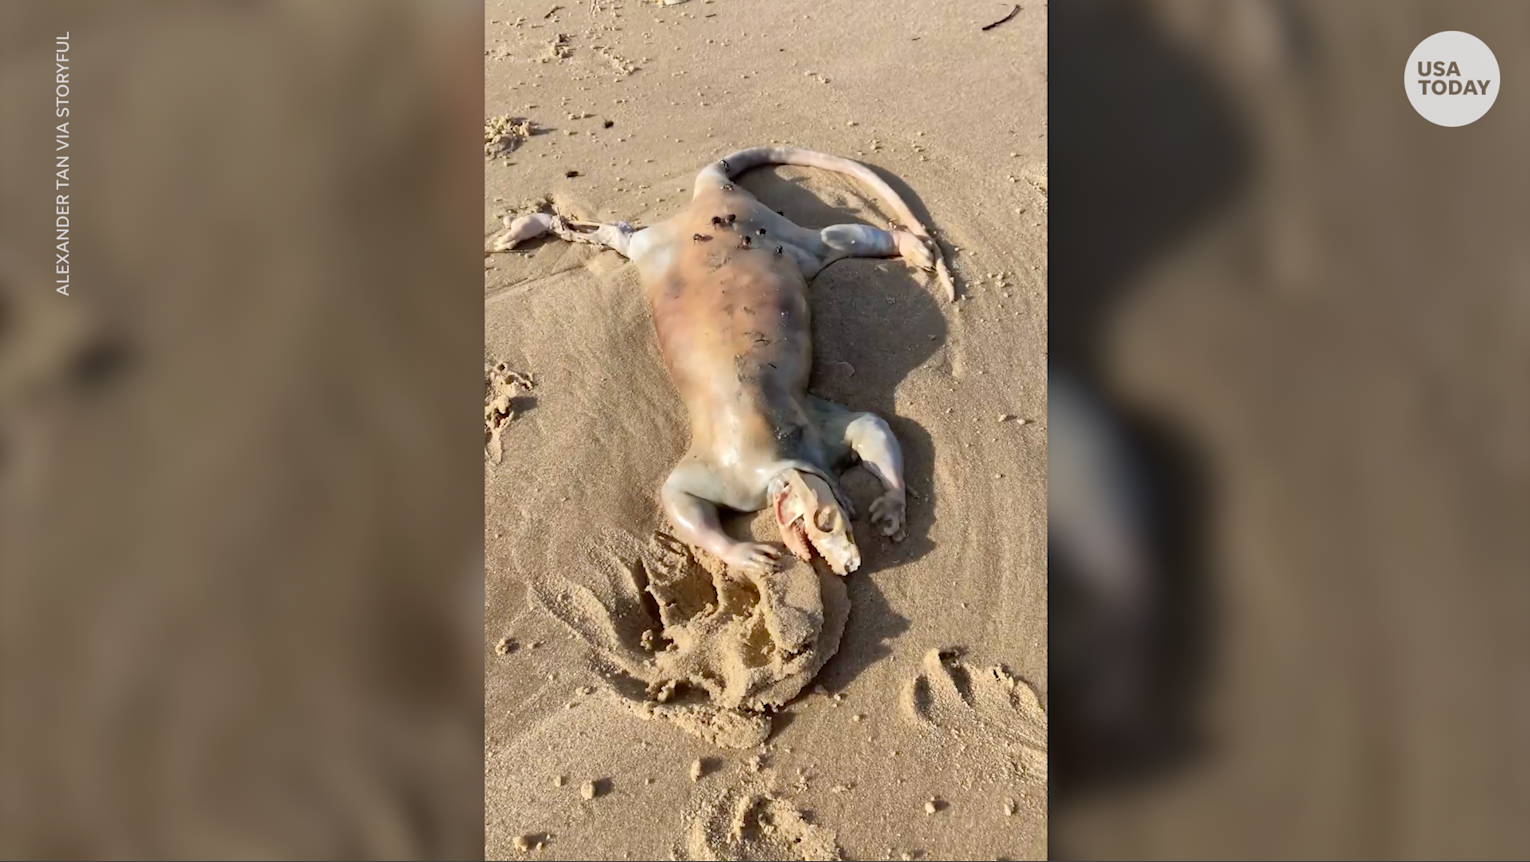 Mysterious 'alien' creature discovered in Australia  goes viral on social media thumbnail